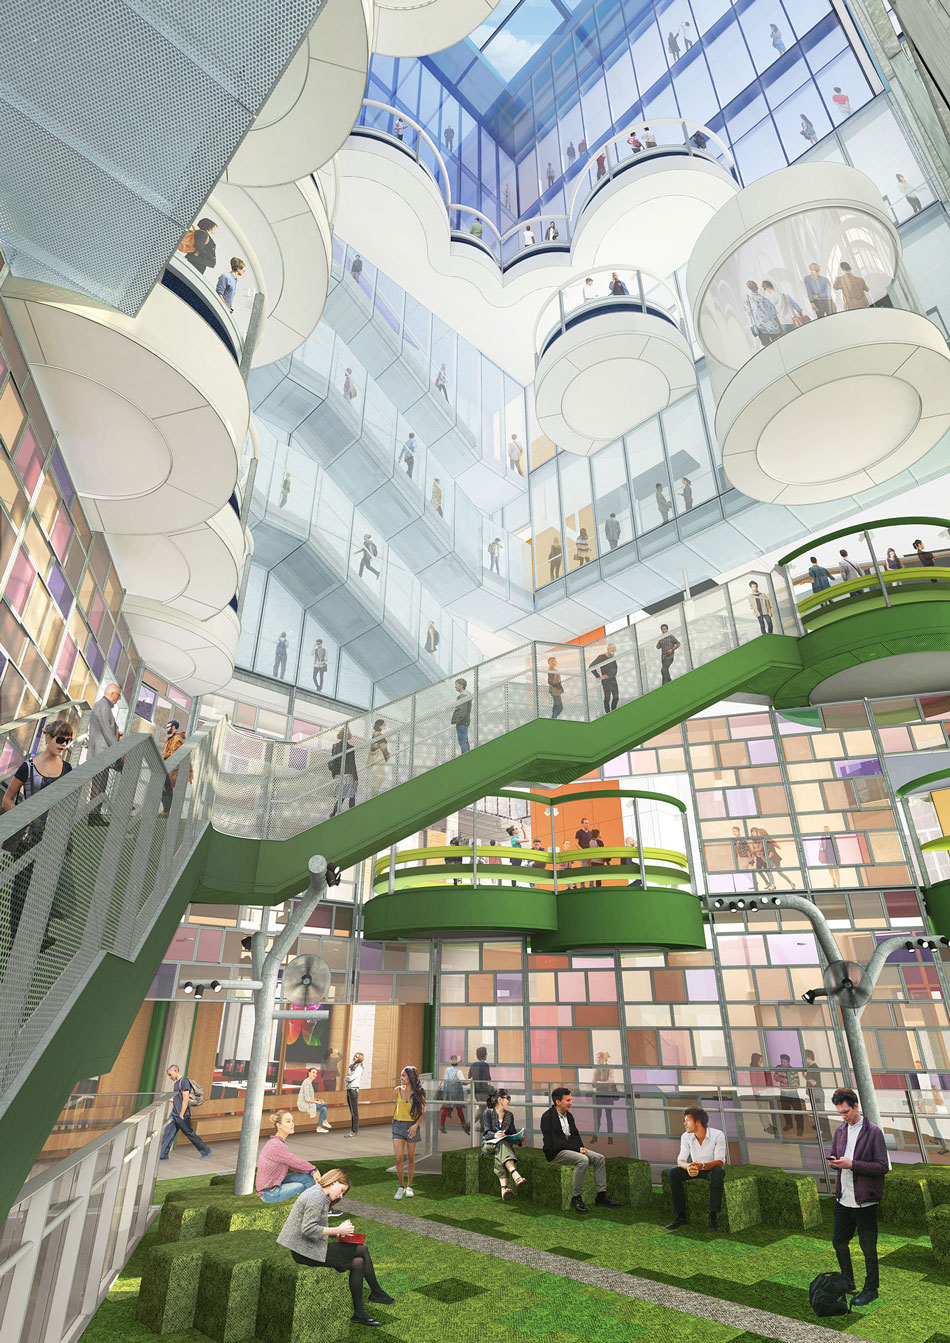 Artist's impression of the Atrium of UQ's new Liveris Academy, housing the Faculty of Engineering, Architecture and Information Technology (EAIT)